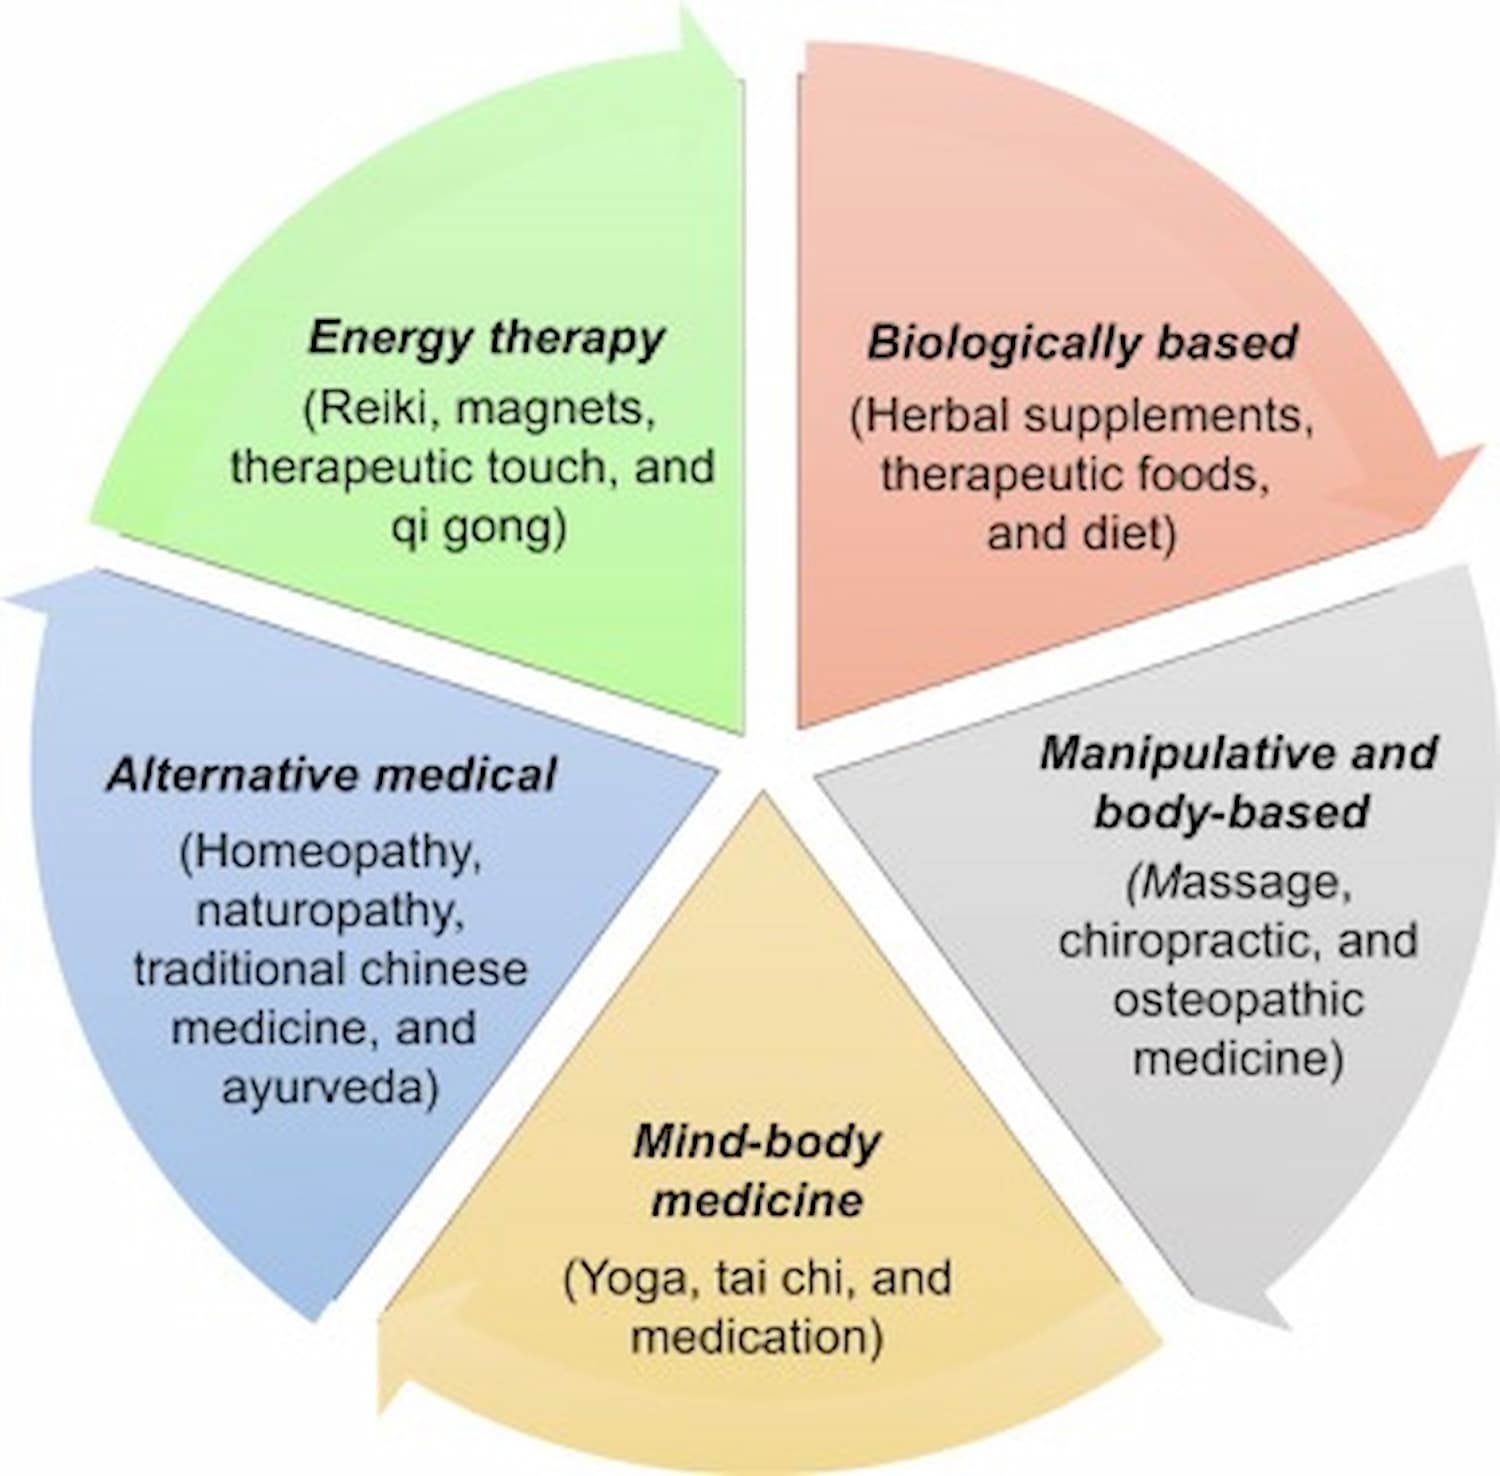 Different types of complementary therapies used in integrative medicine